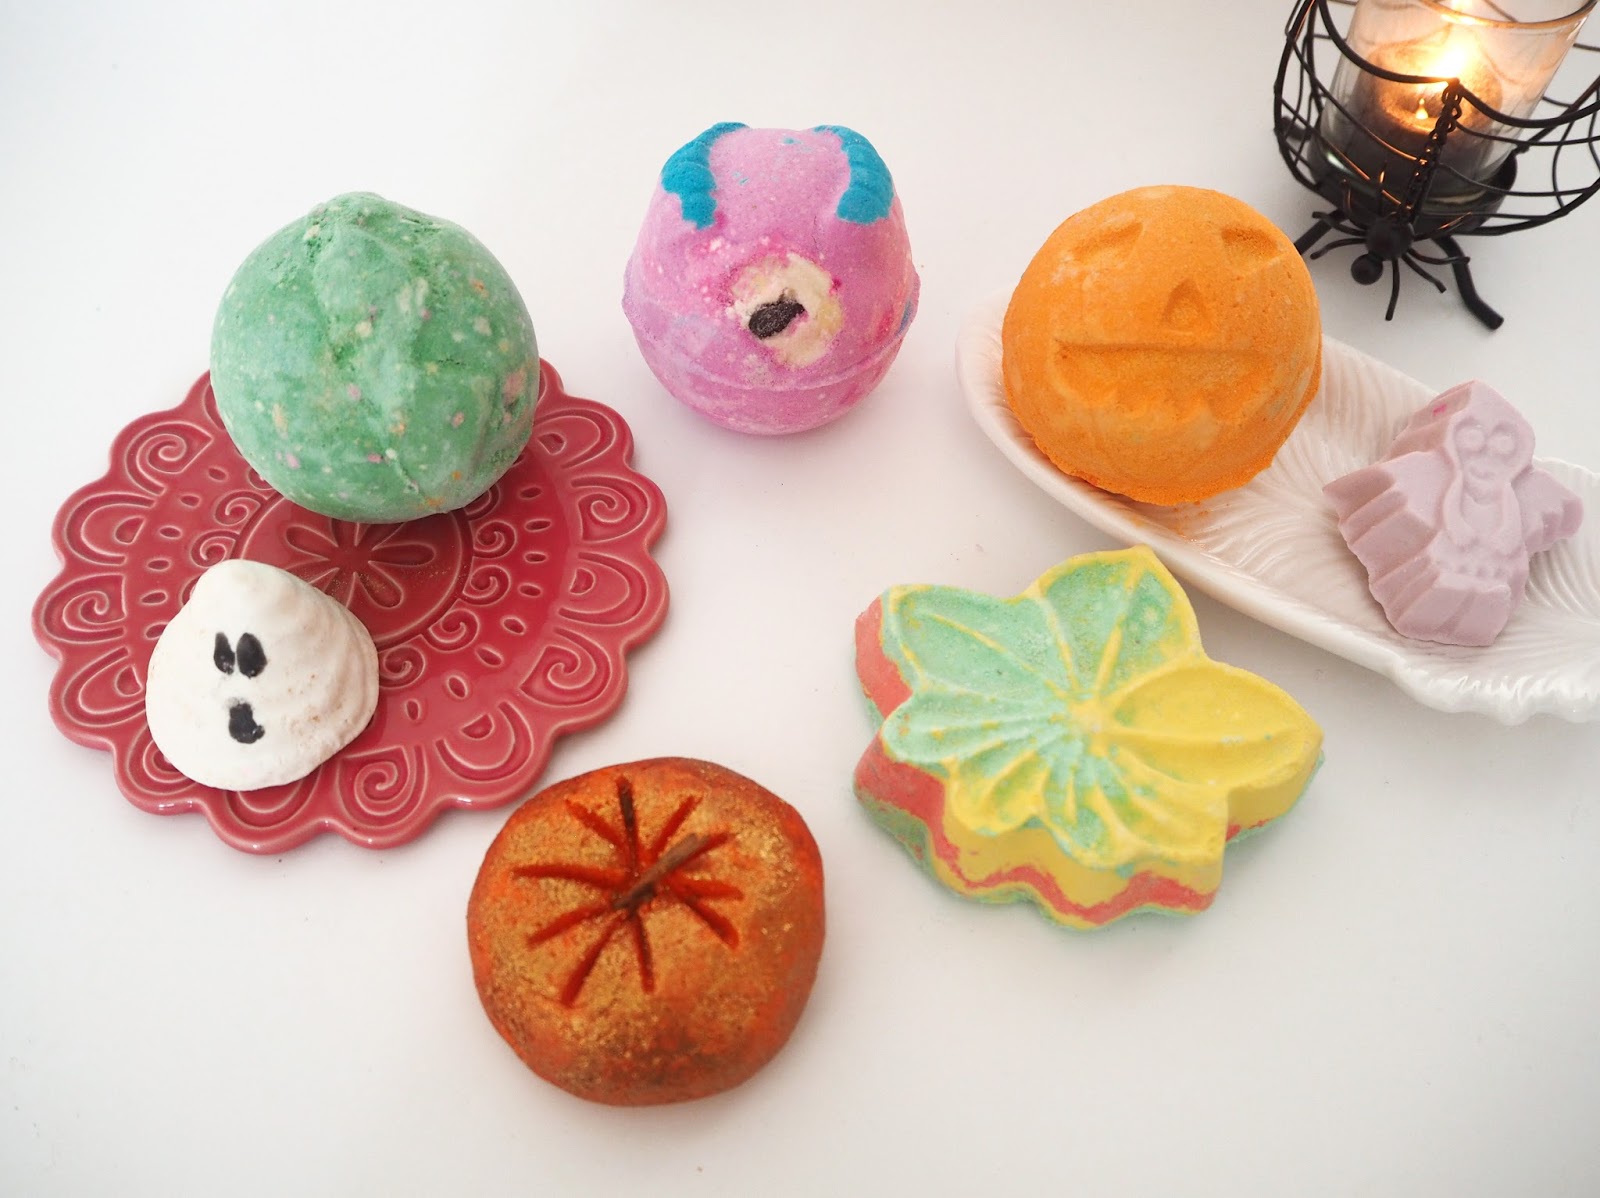 Lush Halloween Collection 2016, Katie Kirk Loves, Beauty Blogger, Bath Products, Lush UK